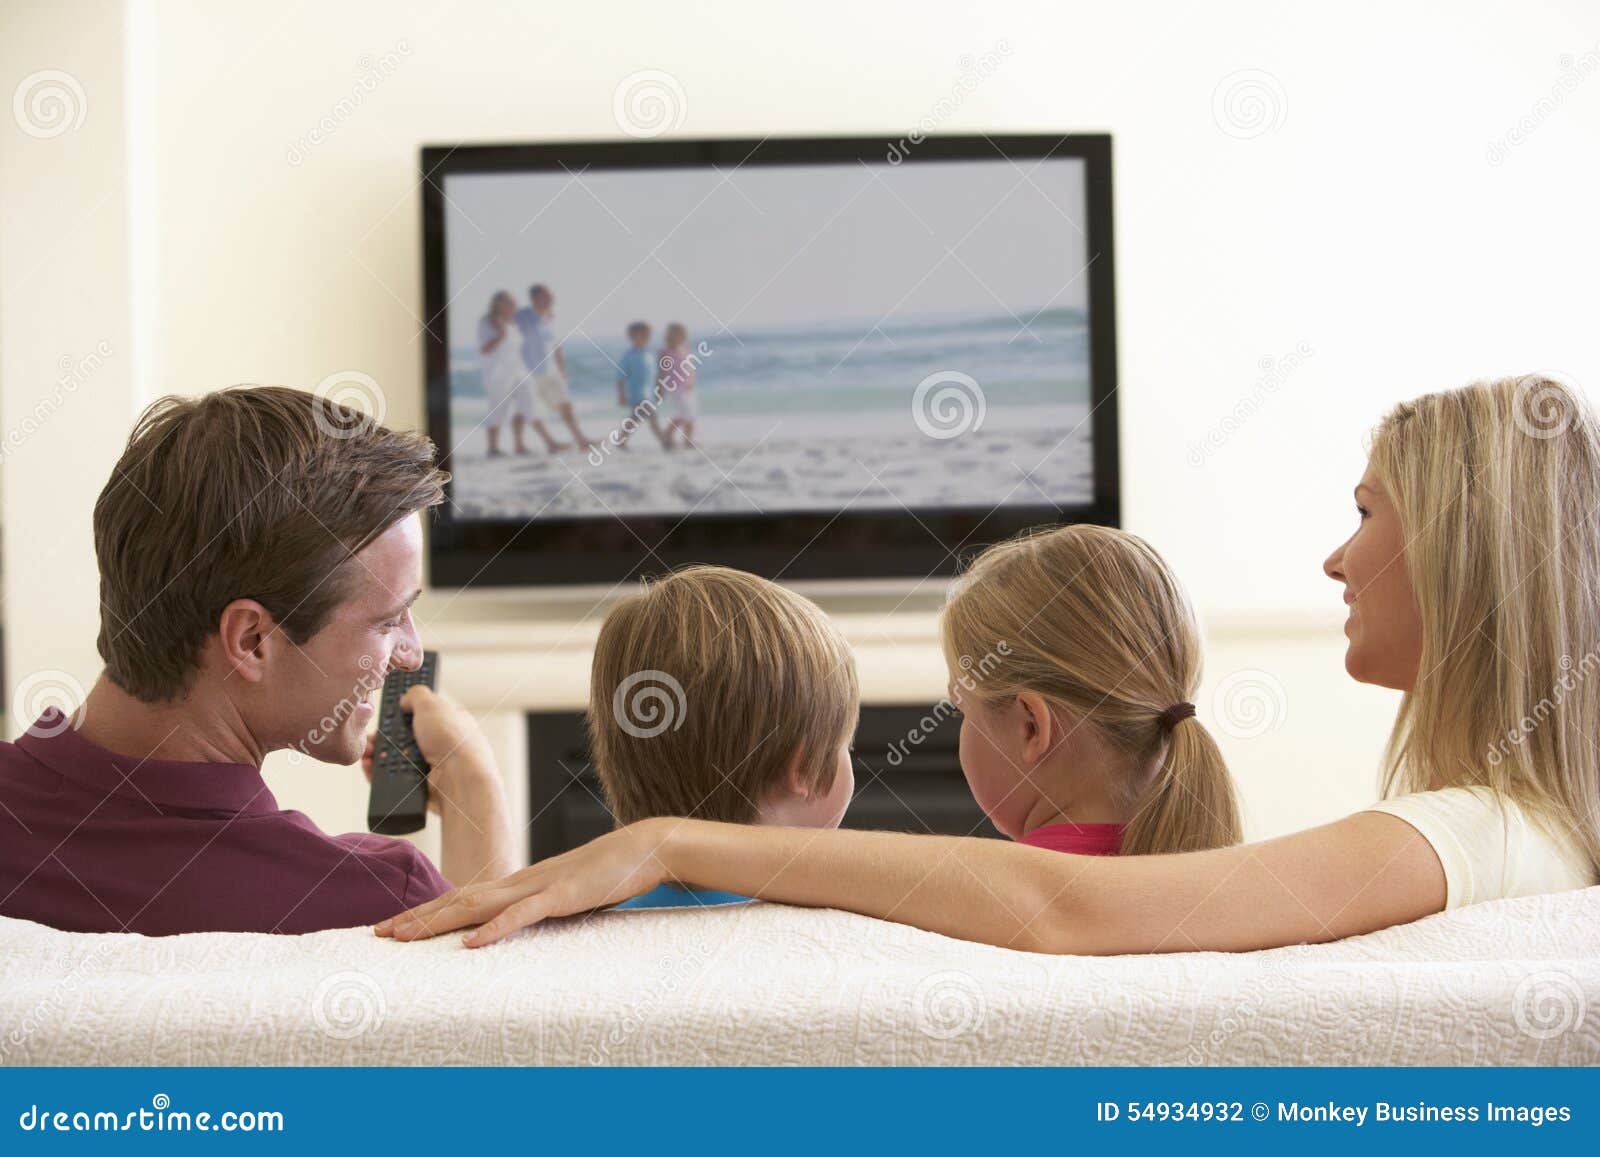 family watching widescreen tv at home